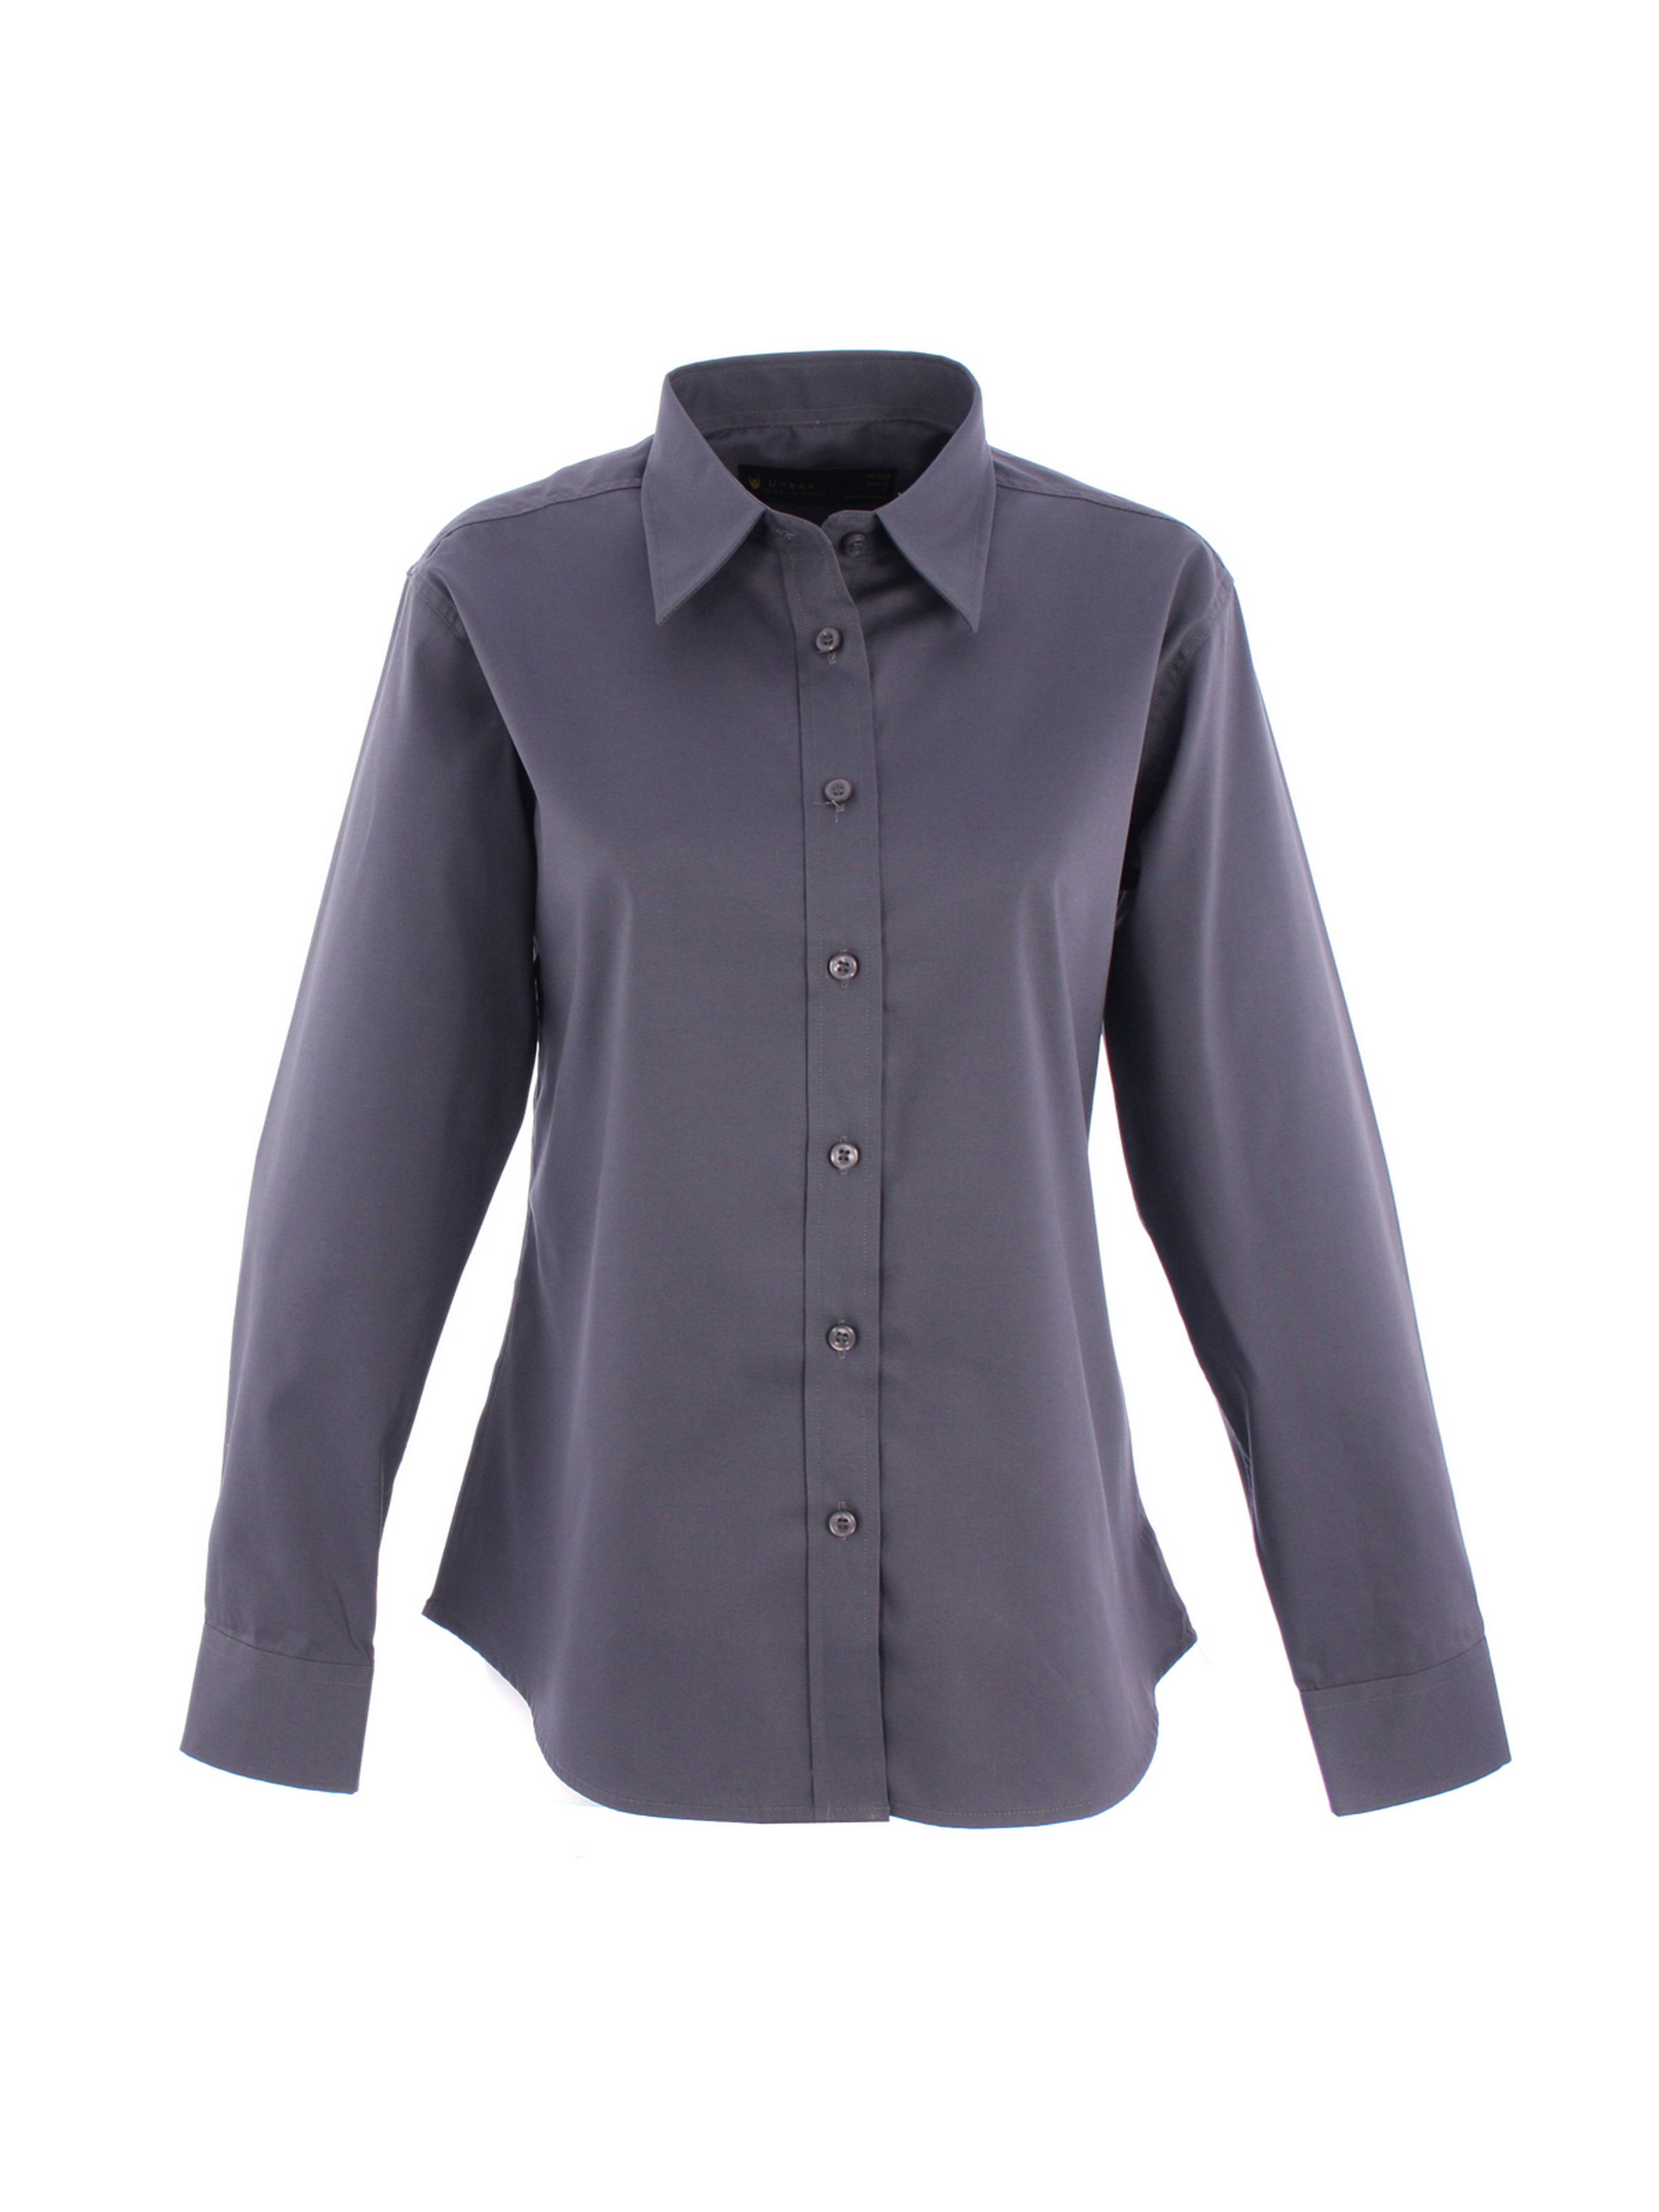 UC703 Ladies Pinpoint Oxford Full Sleeve Shirt